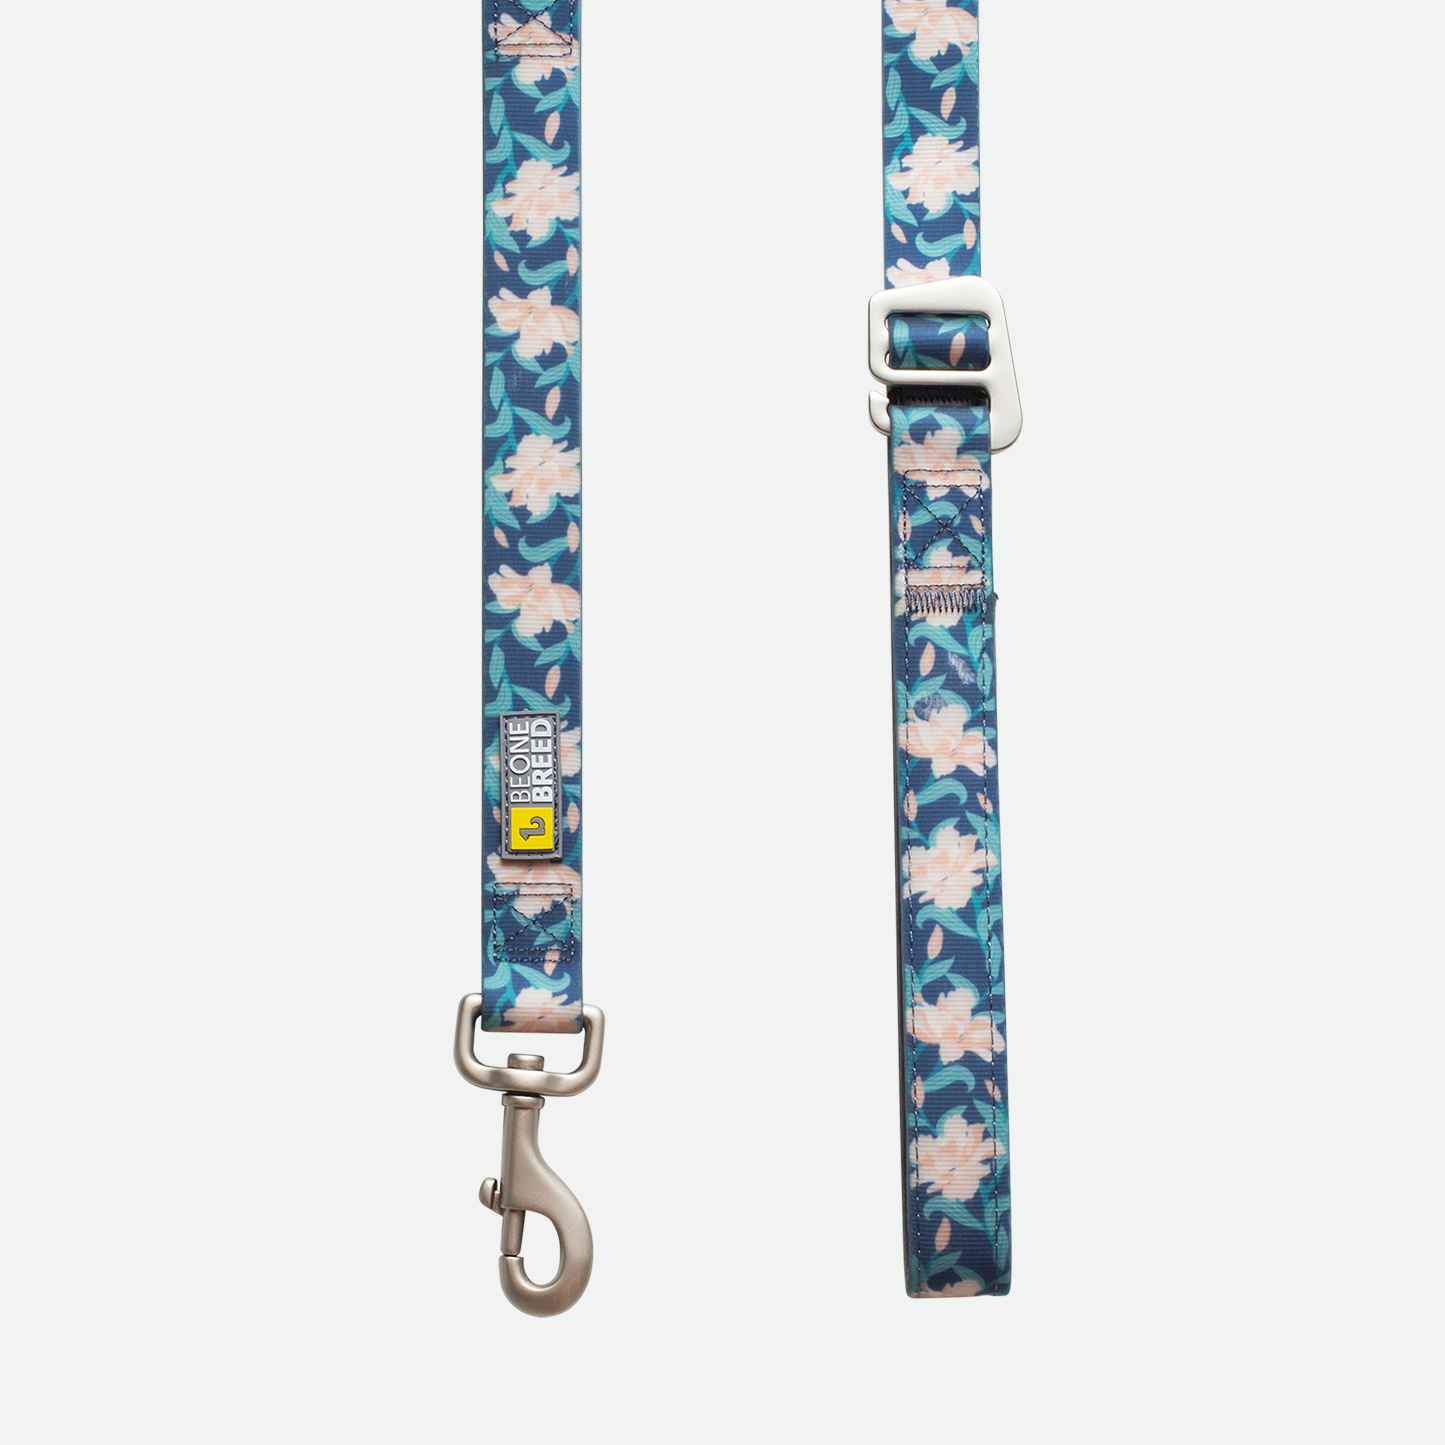 Silicone leash for dog, autumn flowers style